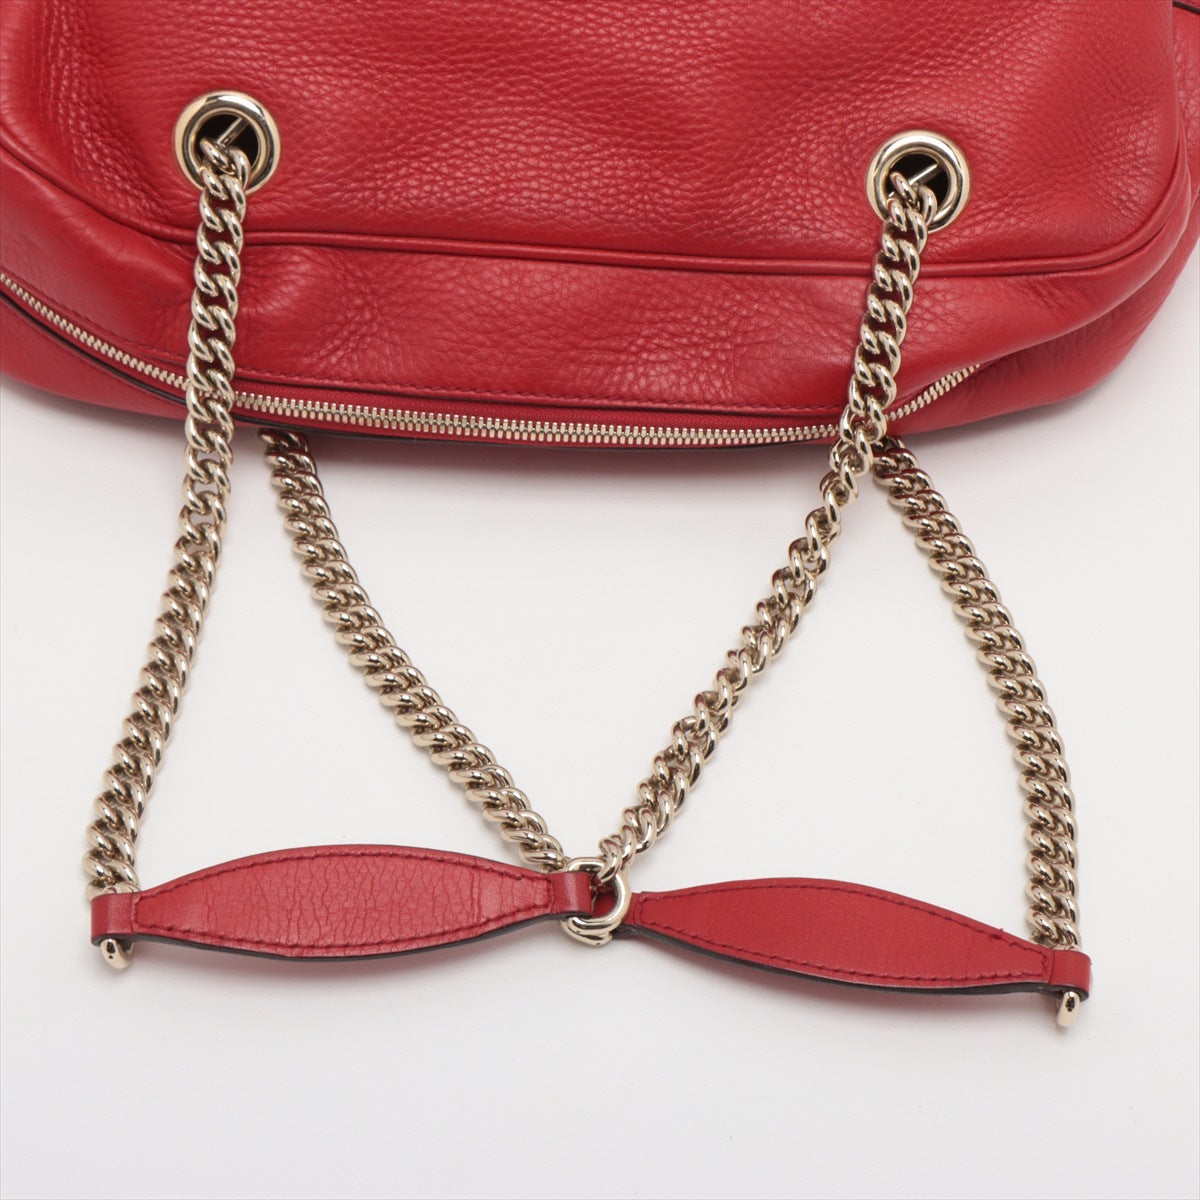 Gucci Soho Leather Chain shoulder bag Red 353126